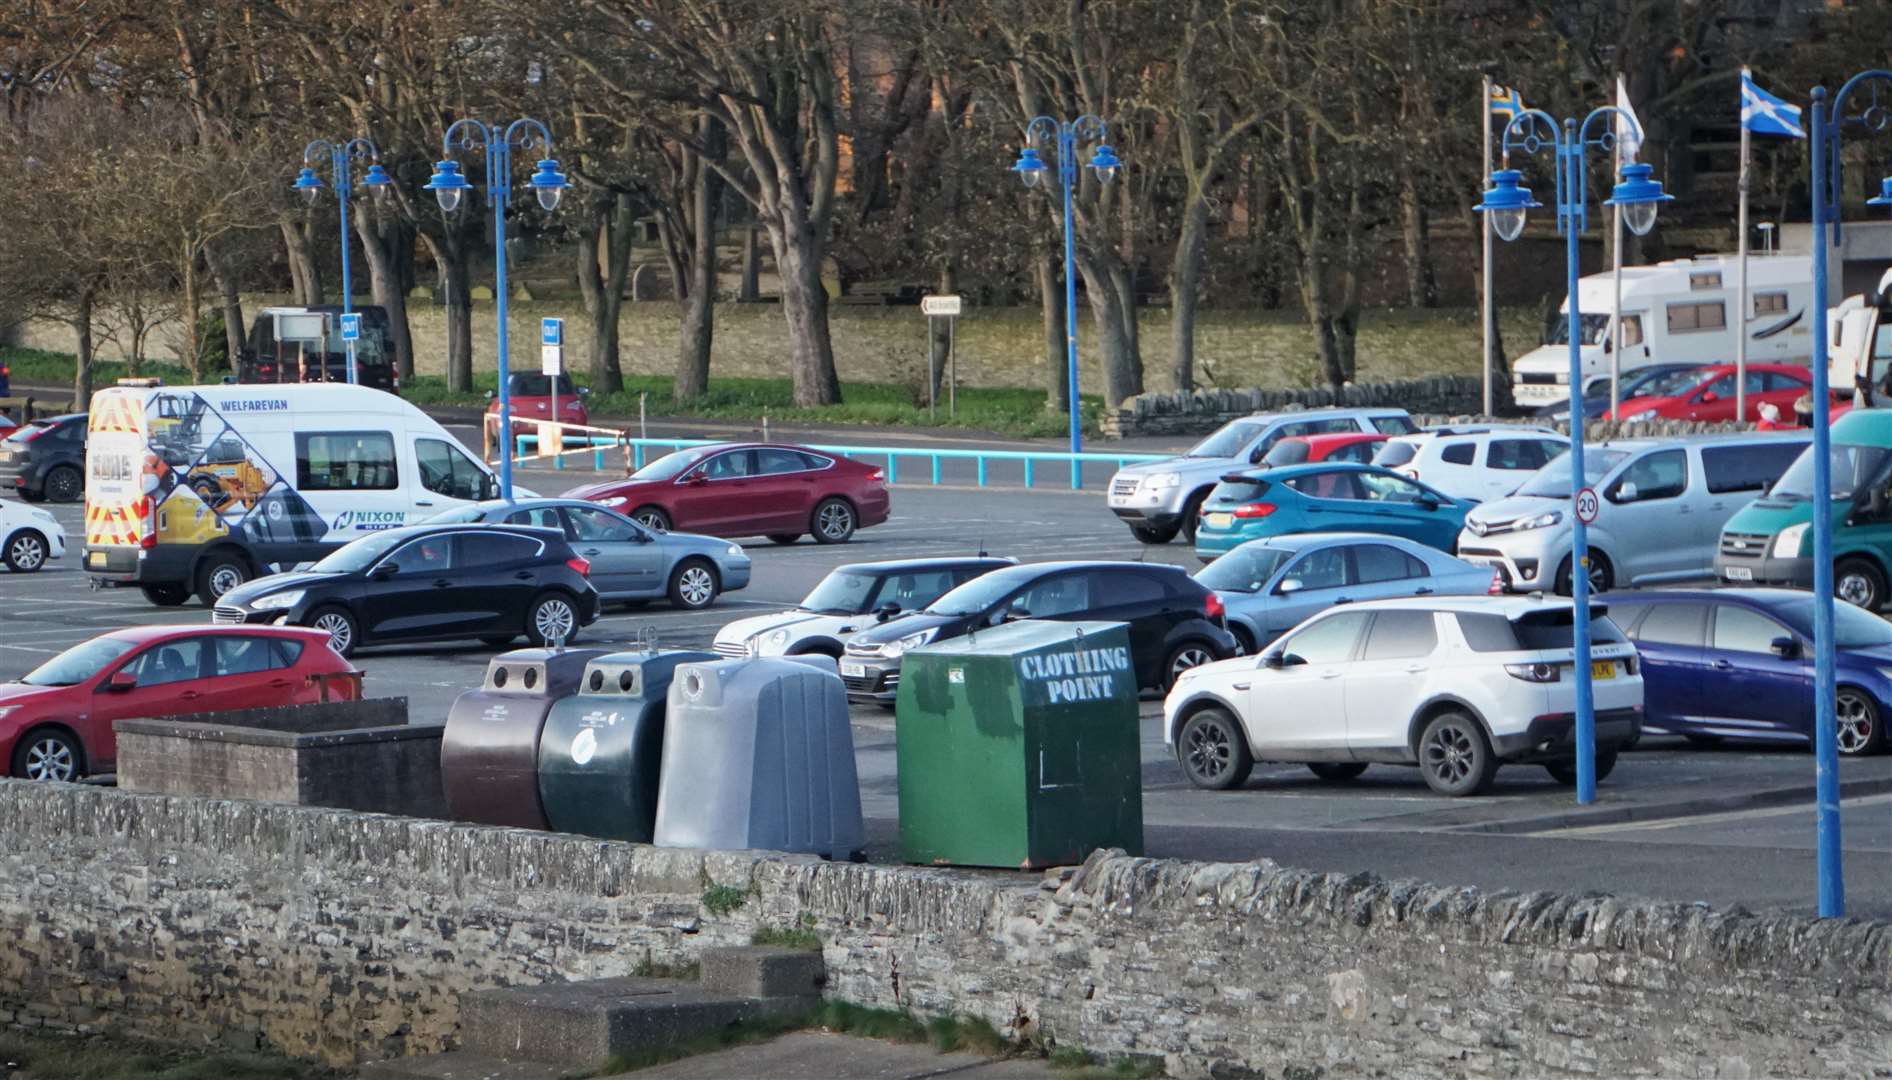 The riverside car park in Wick is among the sites on the proposed 'invitation to pay' scheme. Picture: DGS